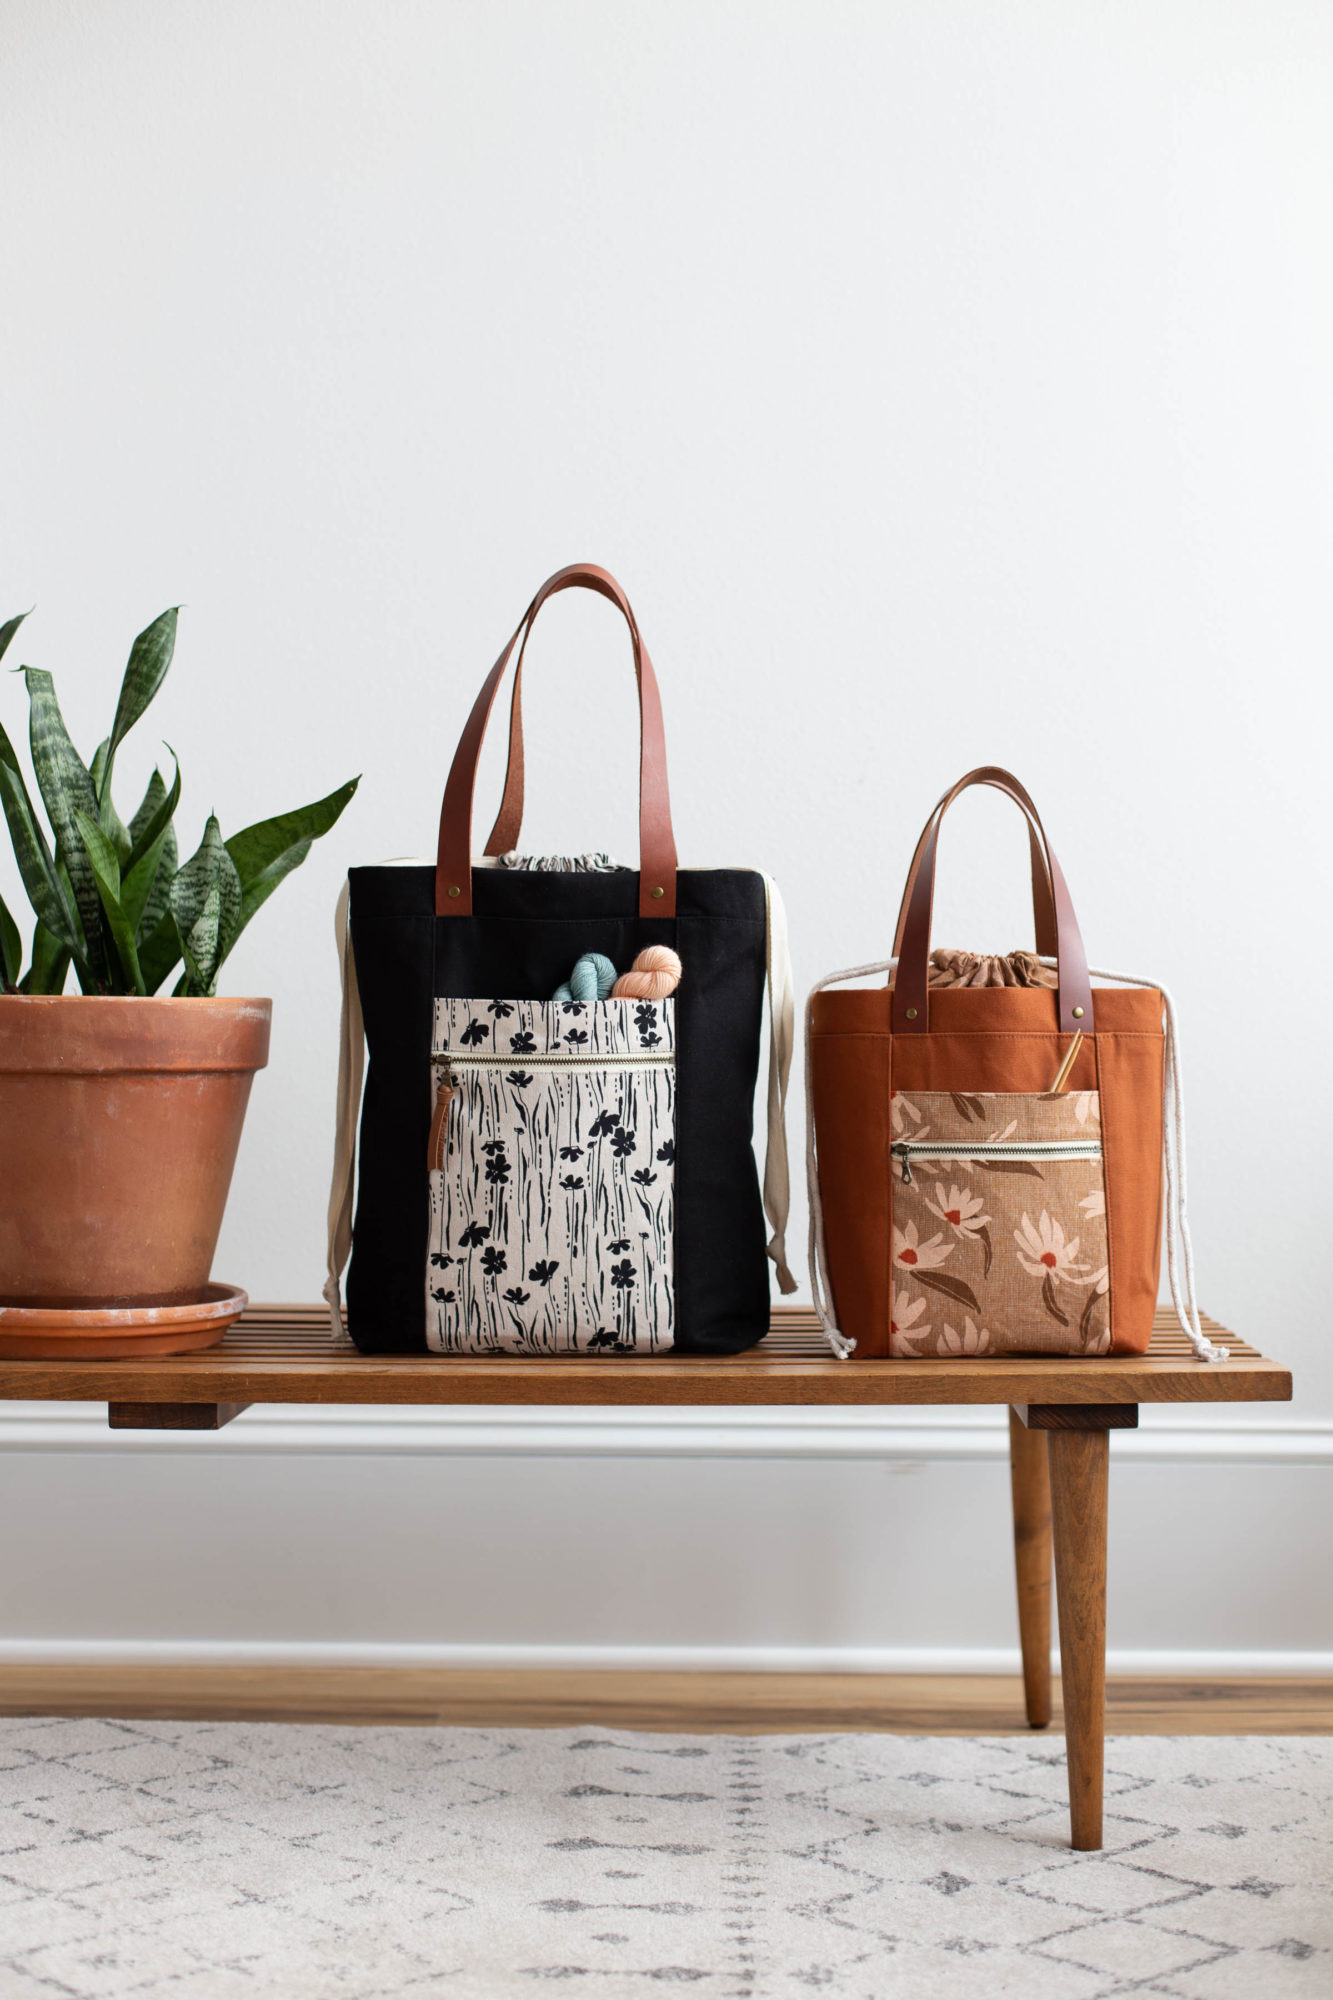 Firefly Totes Around the Bend
